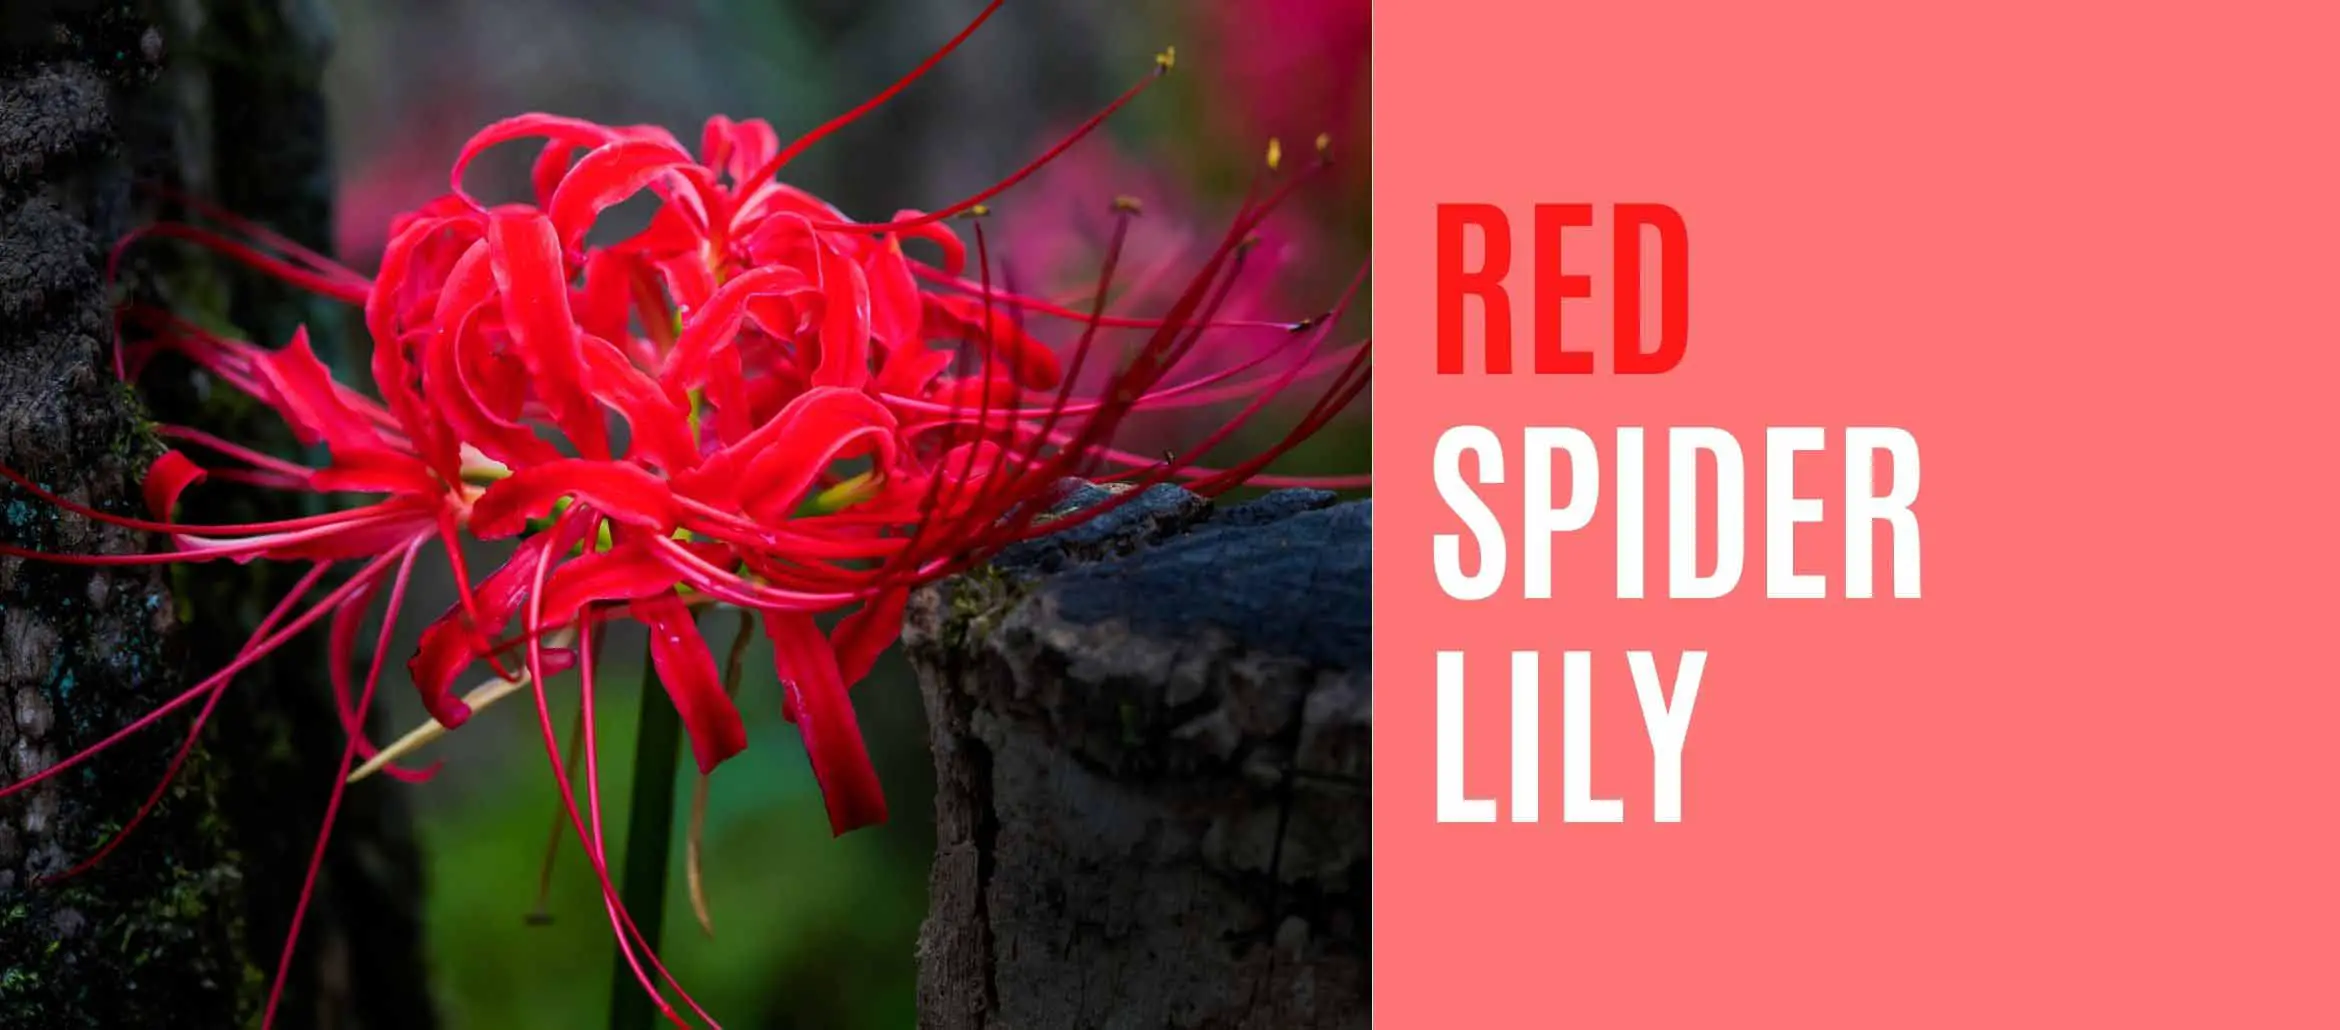 Red spider lily information